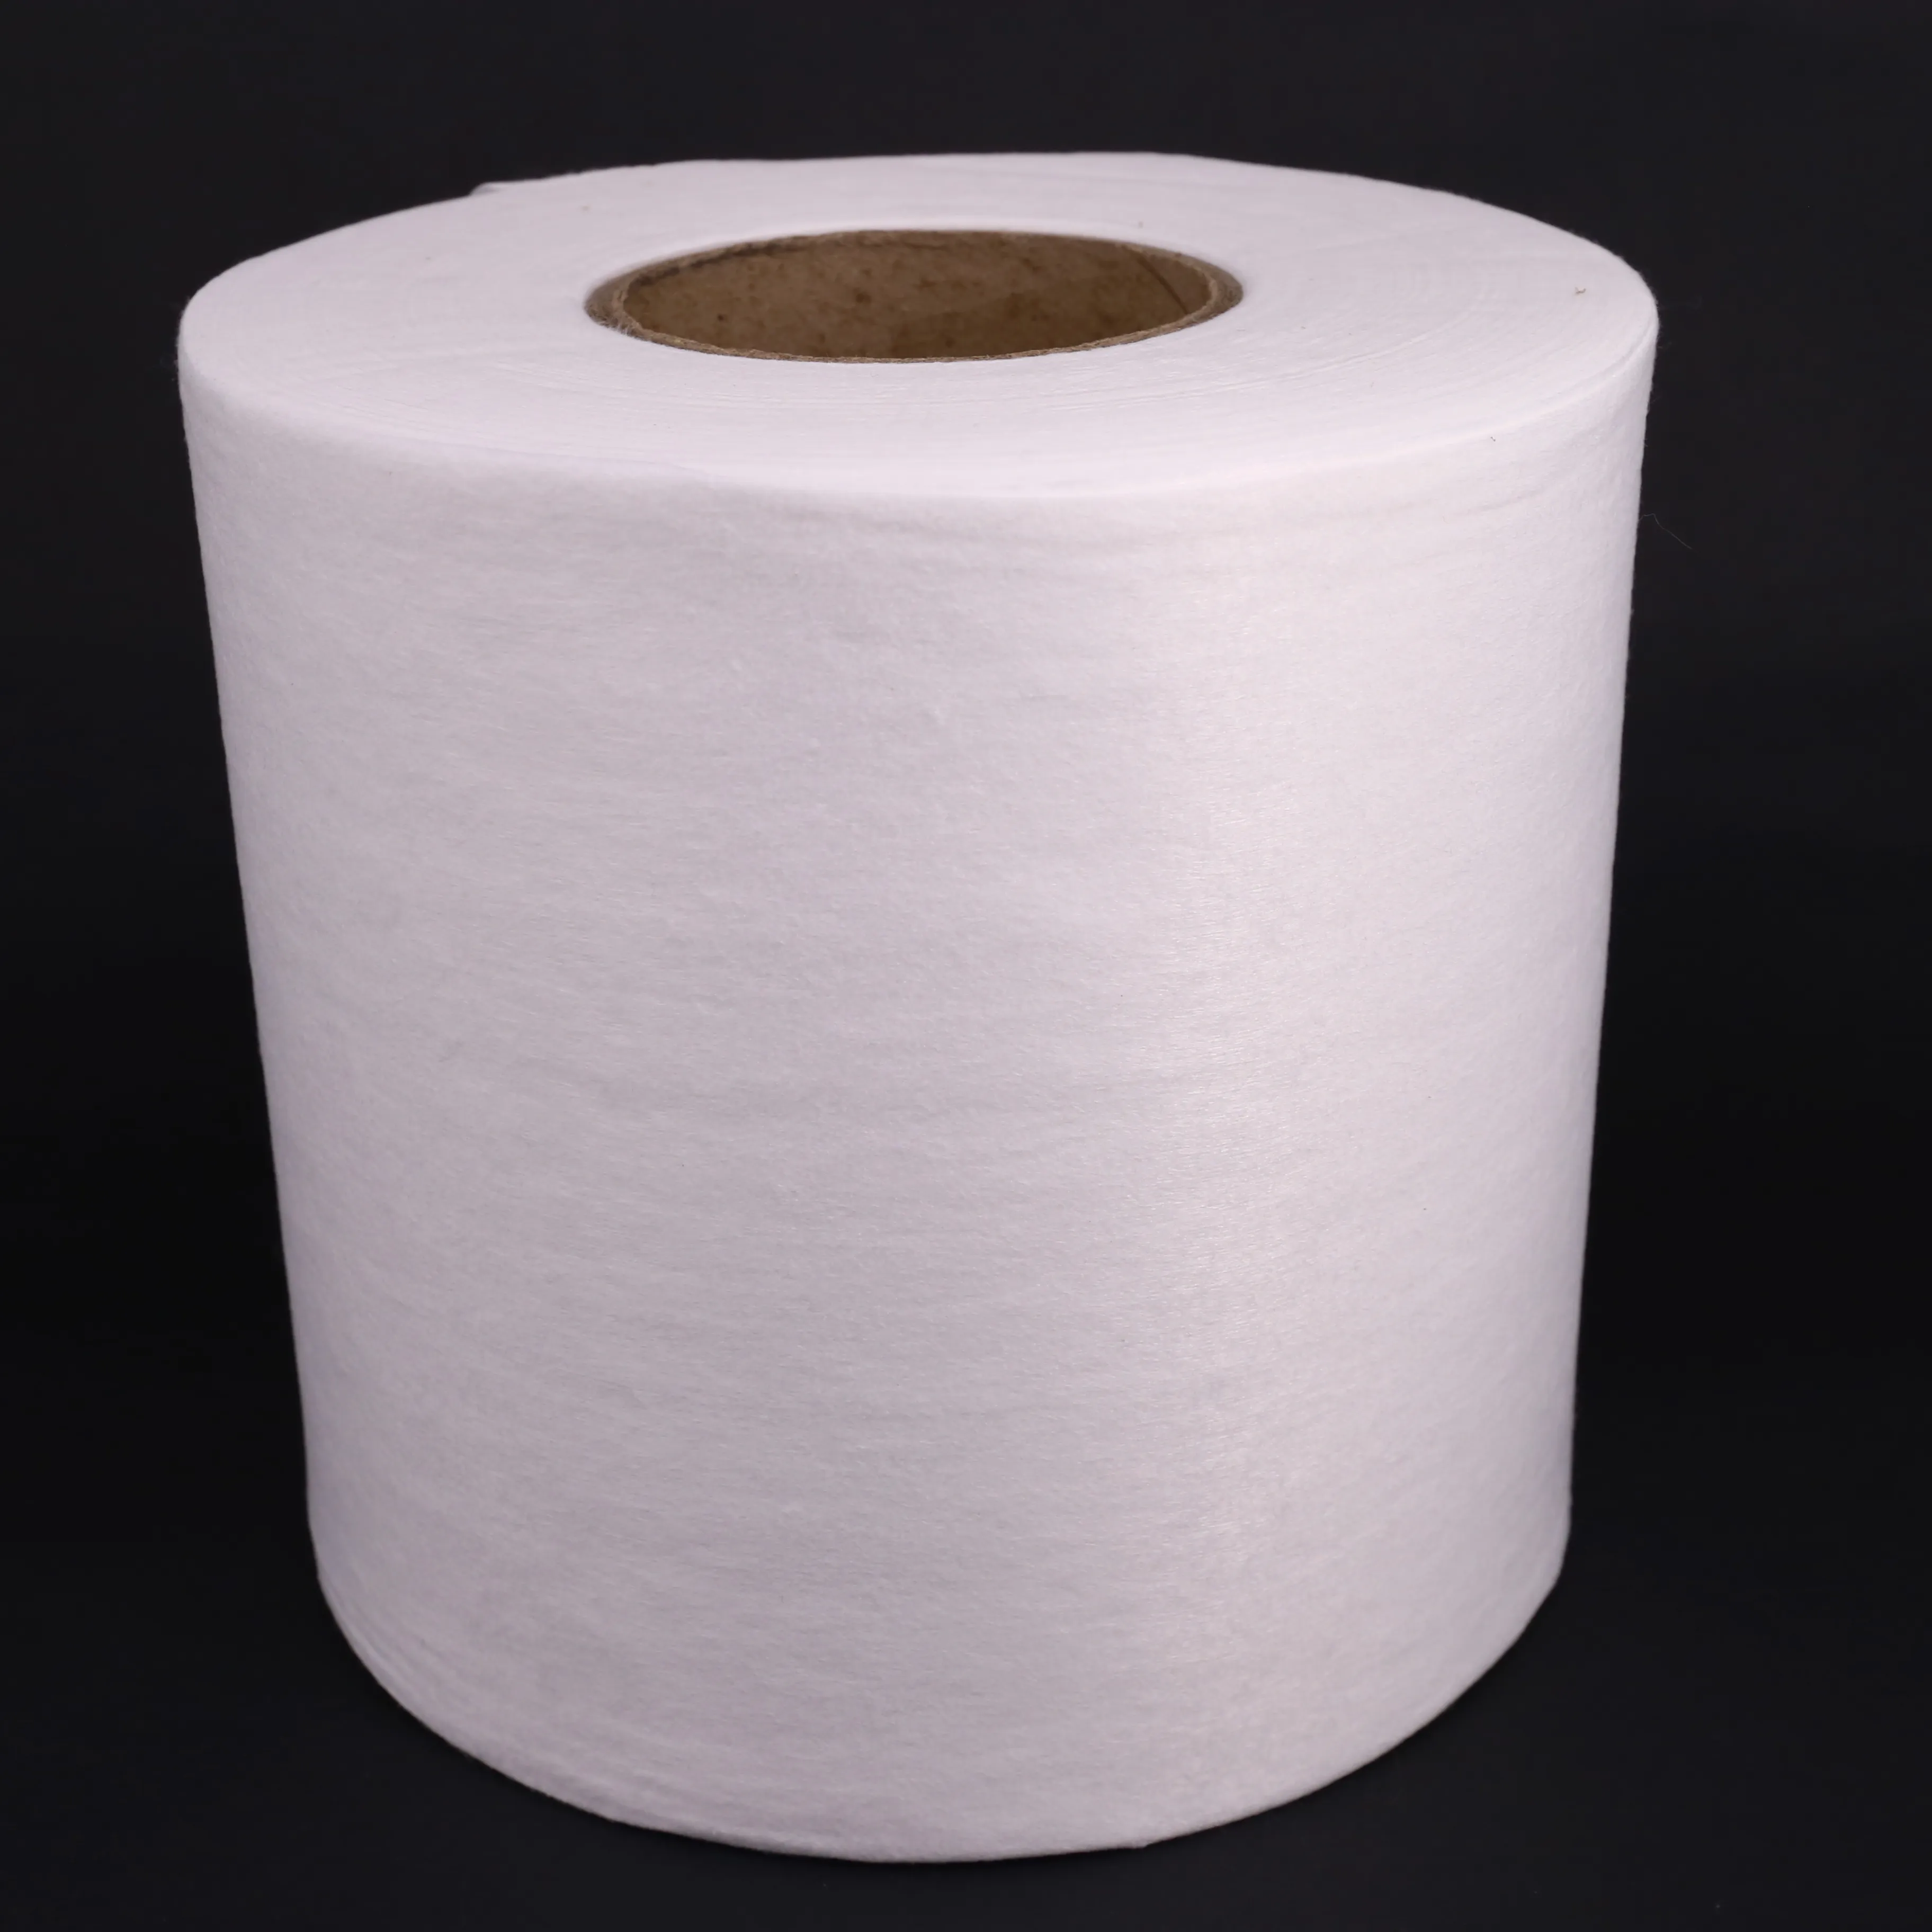 100% polyester / viscose Spunlace Nonwoven Fabric for wet wipes